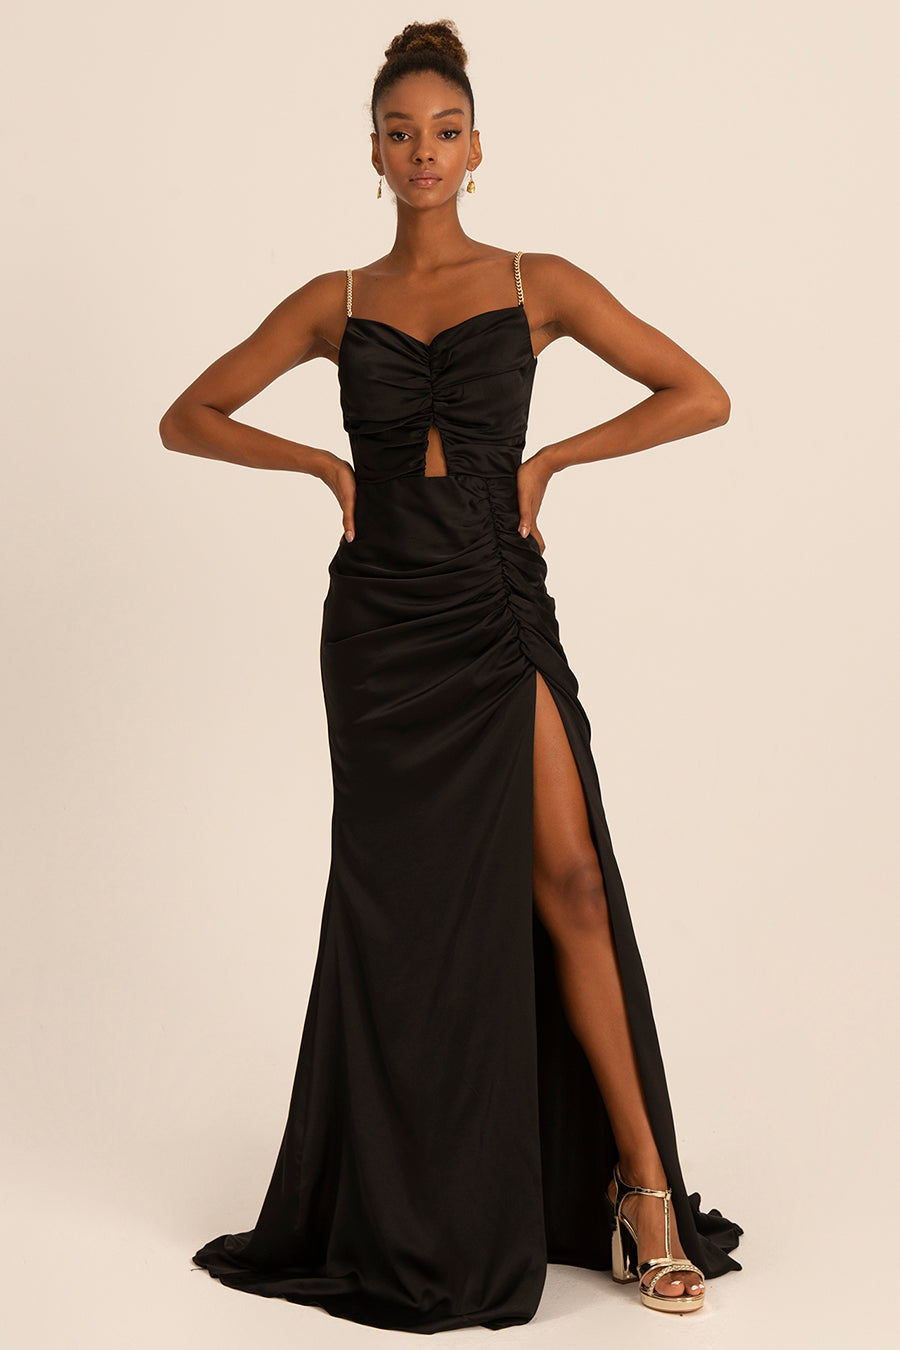 Arianna - Mystic Evenings | Evening and Prom Dresses